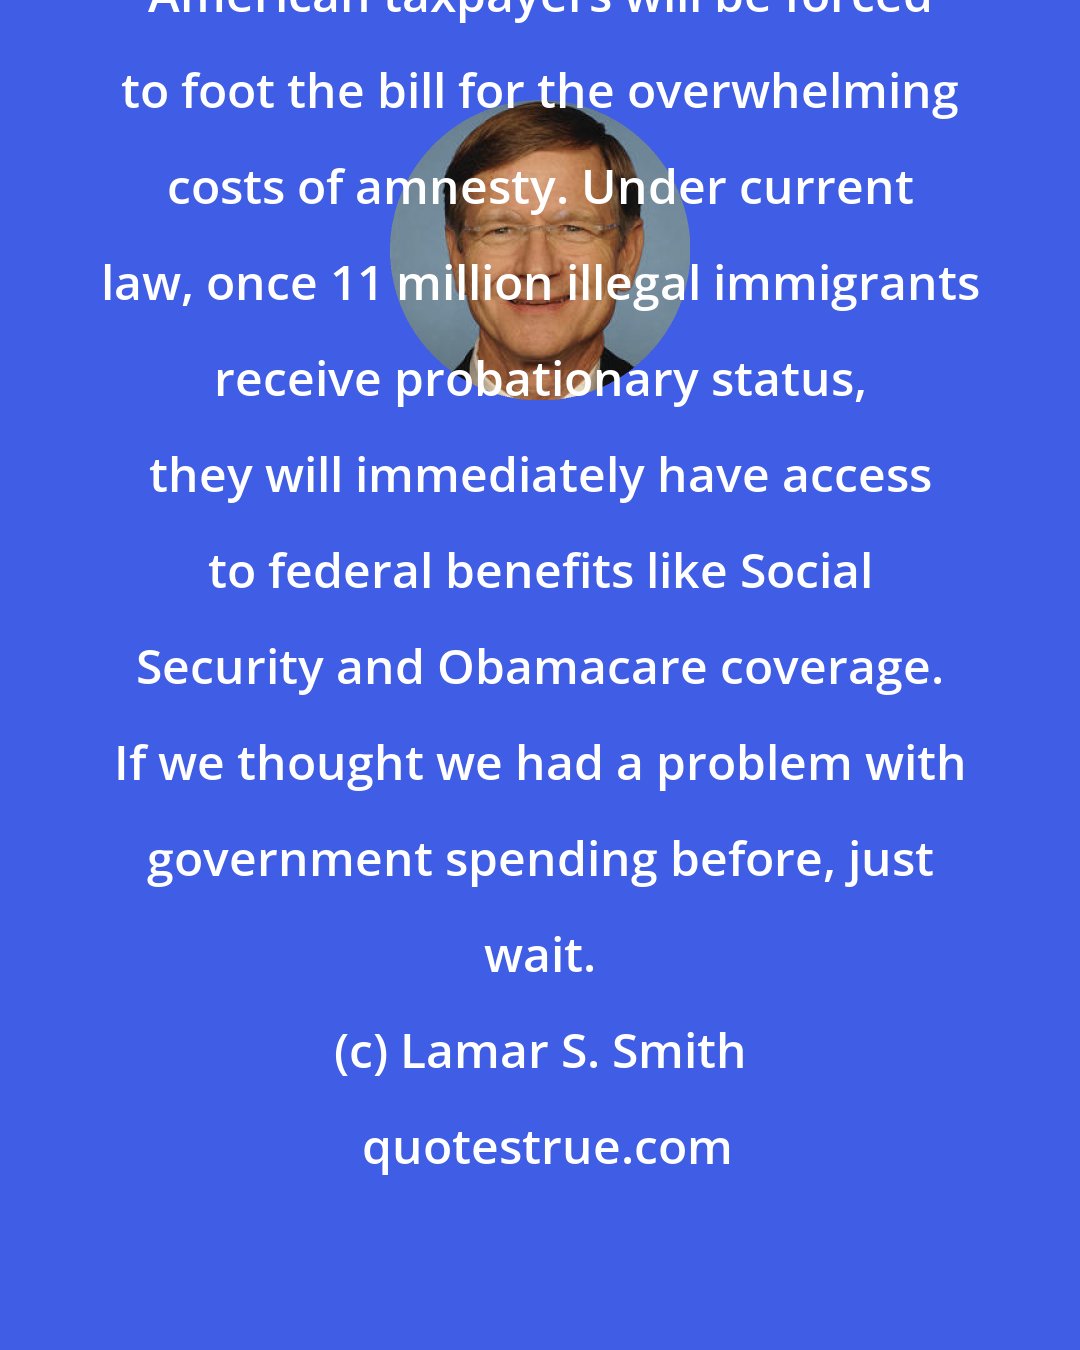 Lamar S. Smith: American taxpayers will be forced to foot the bill for the overwhelming costs of amnesty. Under current law, once 11 million illegal immigrants receive probationary status, they will immediately have access to federal benefits like Social Security and Obamacare coverage. If we thought we had a problem with government spending before, just wait.